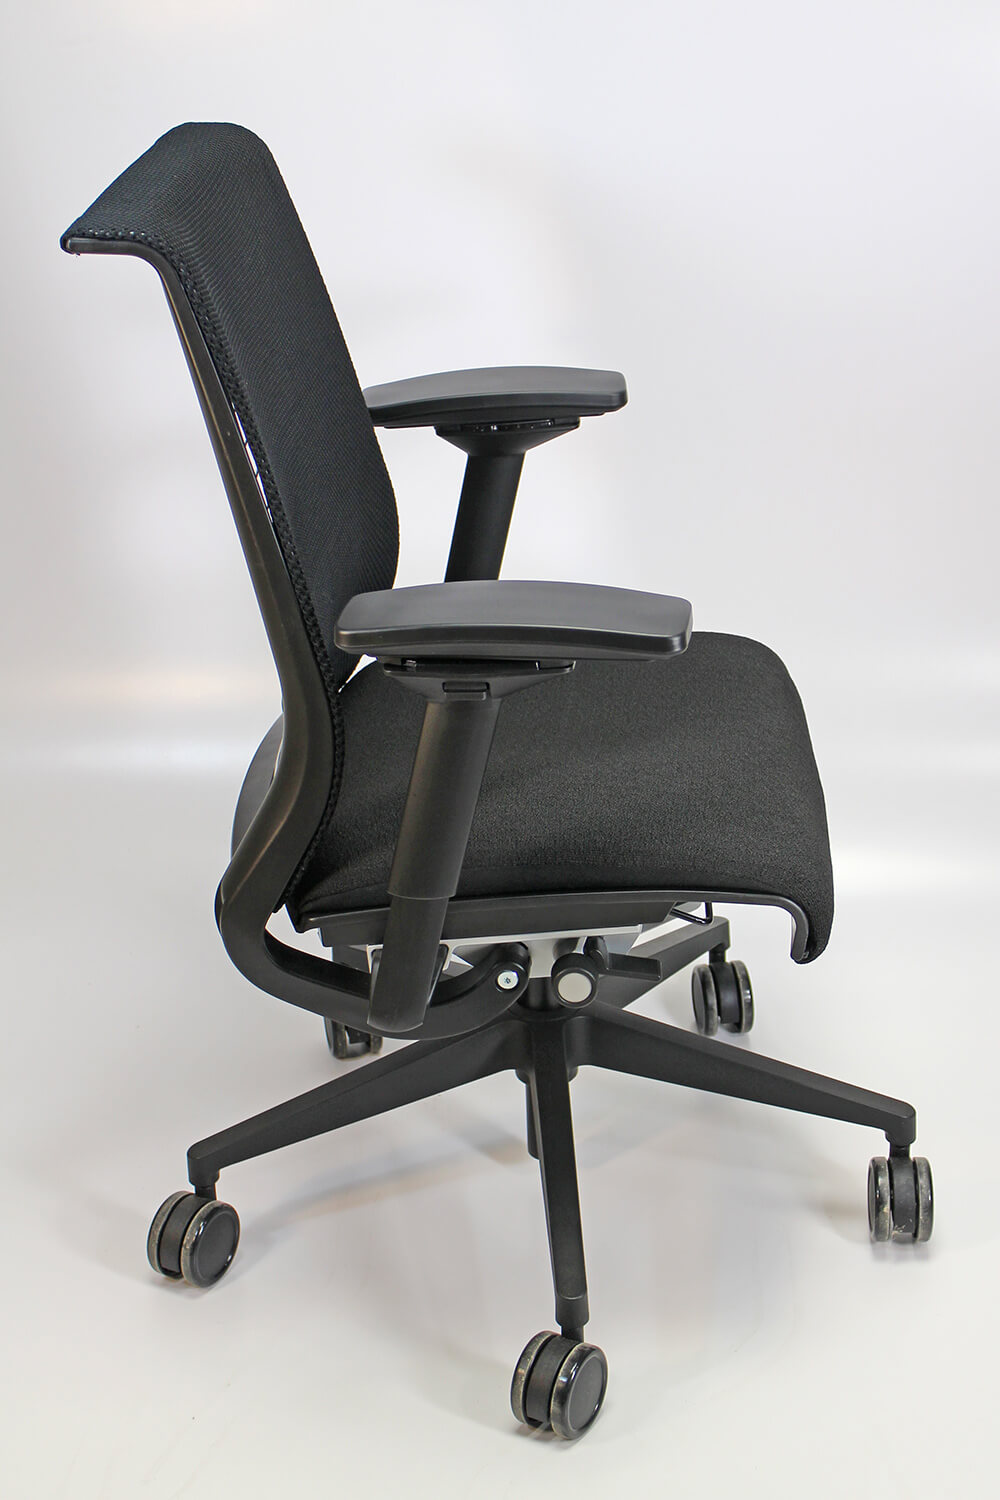 Steelcase think chair side view